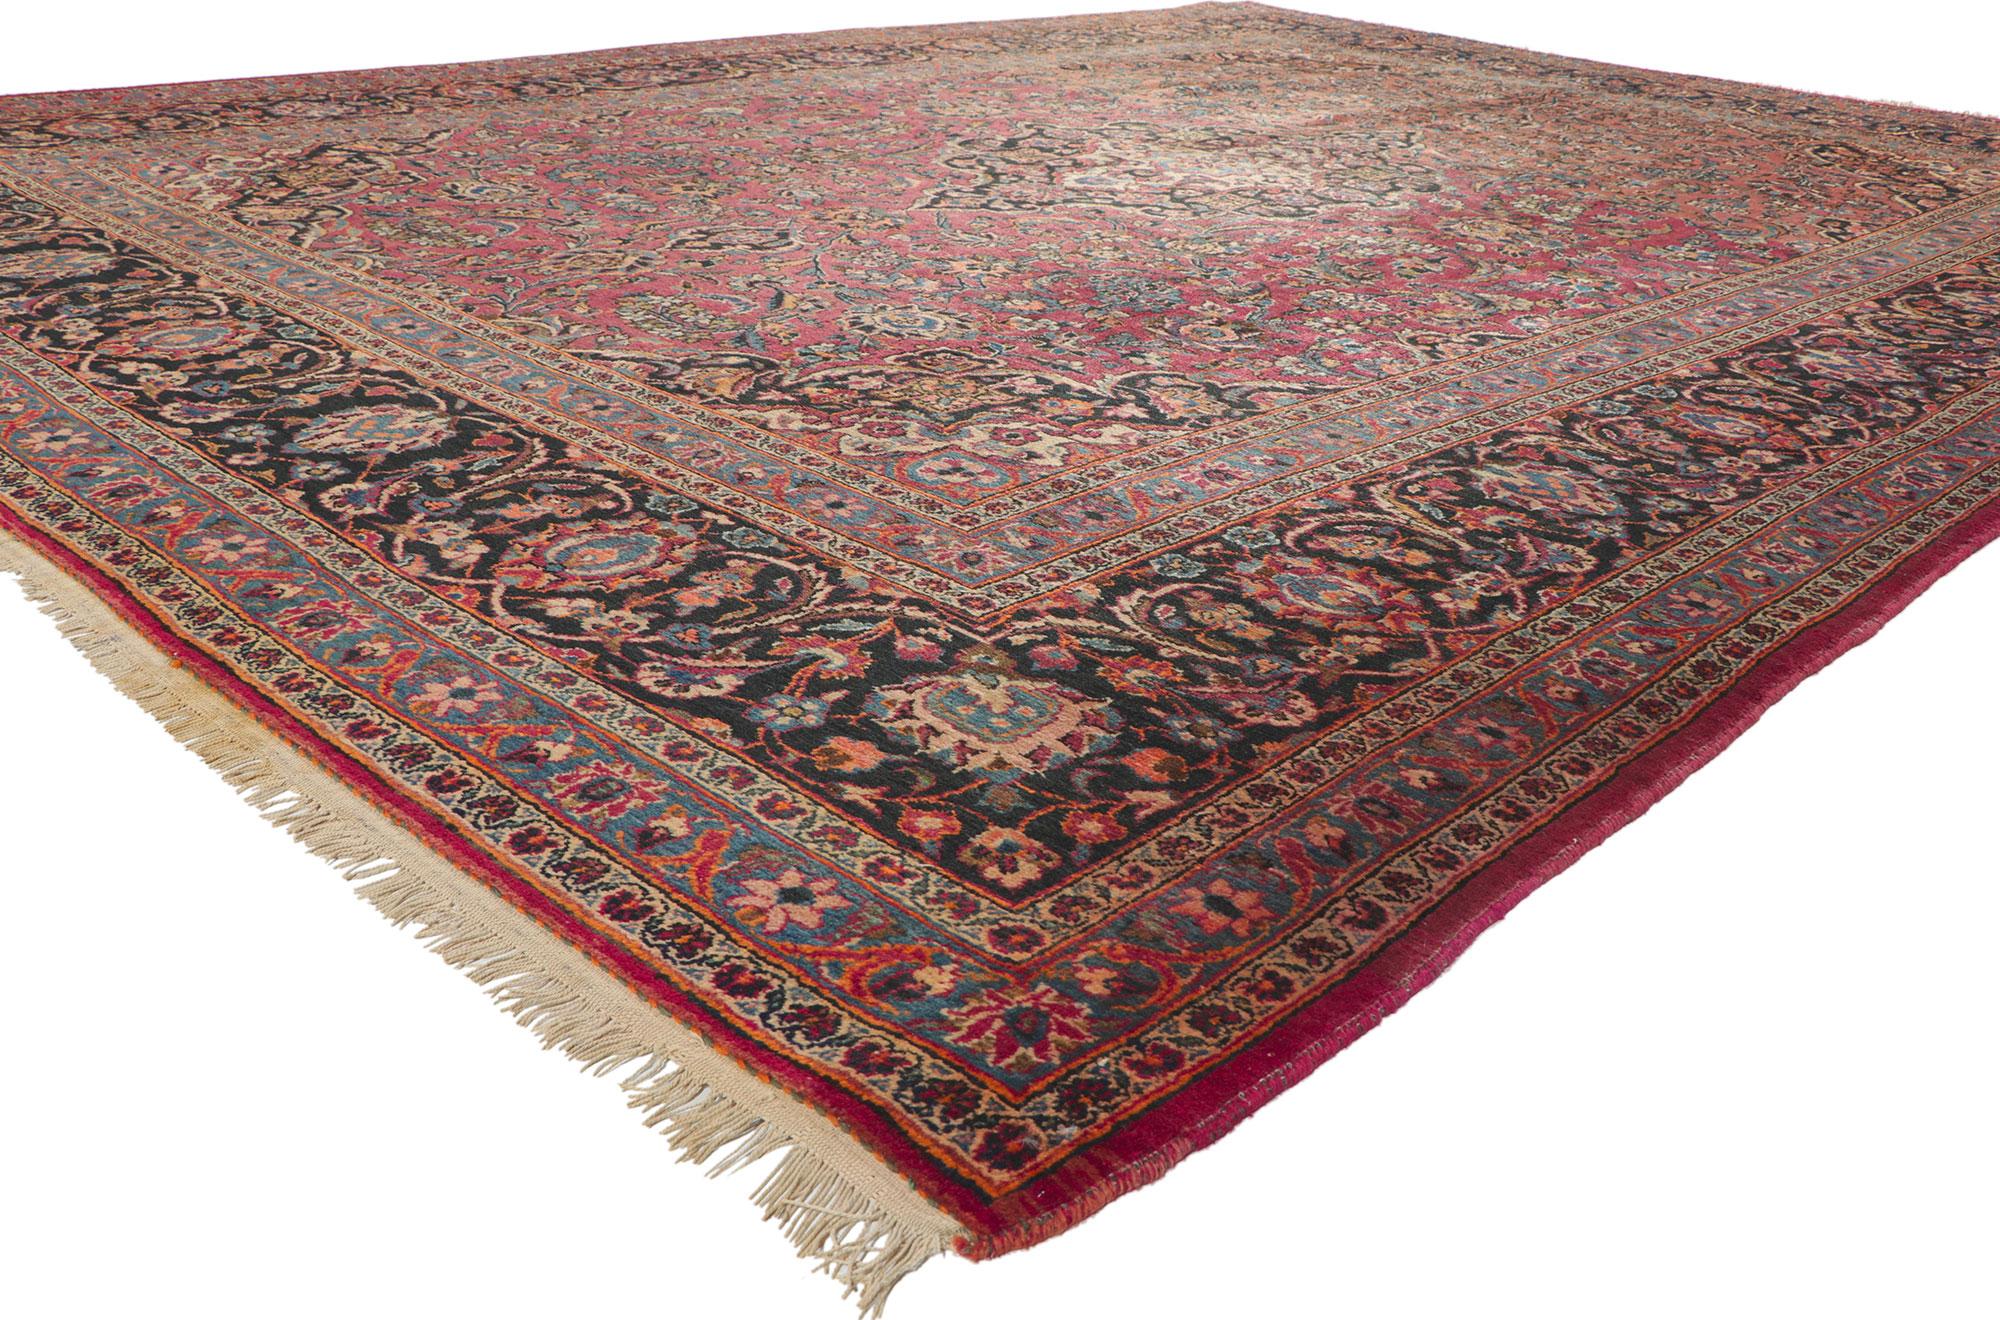 72017 Antique Persian Kashan Rug, 09'11 x 13'02. With its timeless style, incredible detail and texutre, this hand knotted wool antique Persian Kashan rug is a captivating vision of woven beauty. The sophisticated design and refined color palette